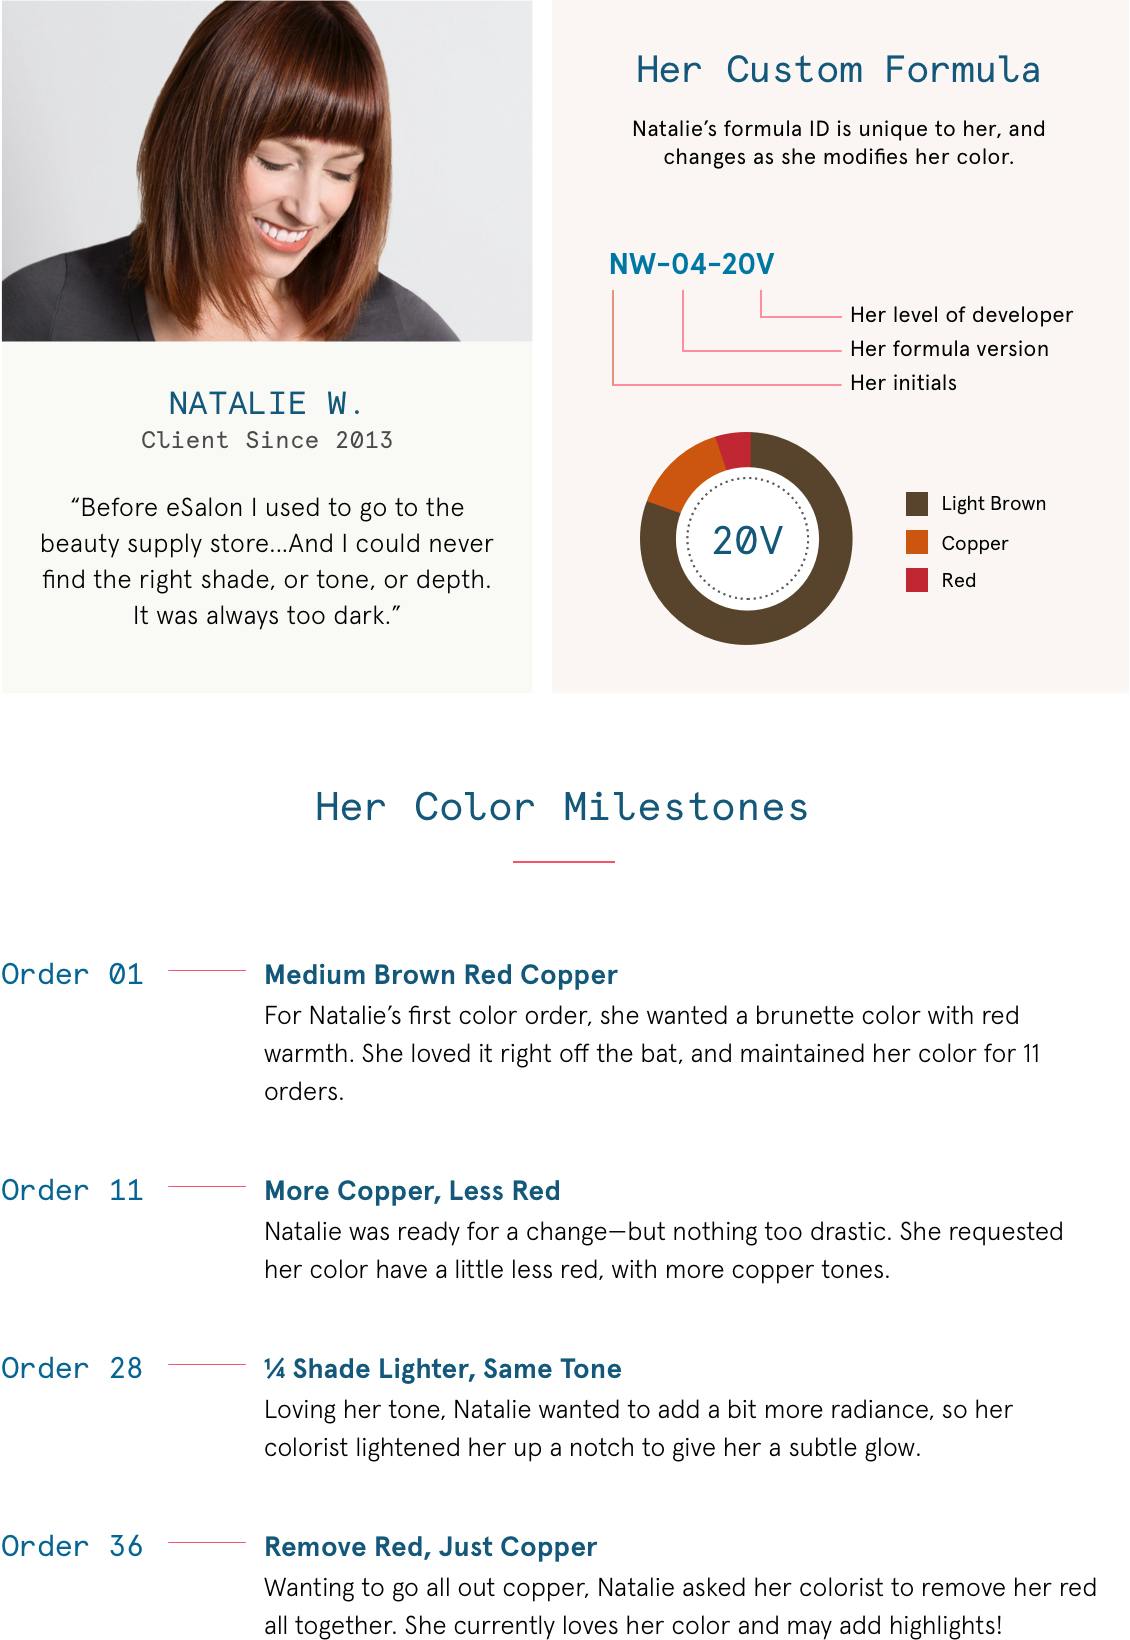 Image of esalon client Natalie's color wheel with information about her custom home hair color